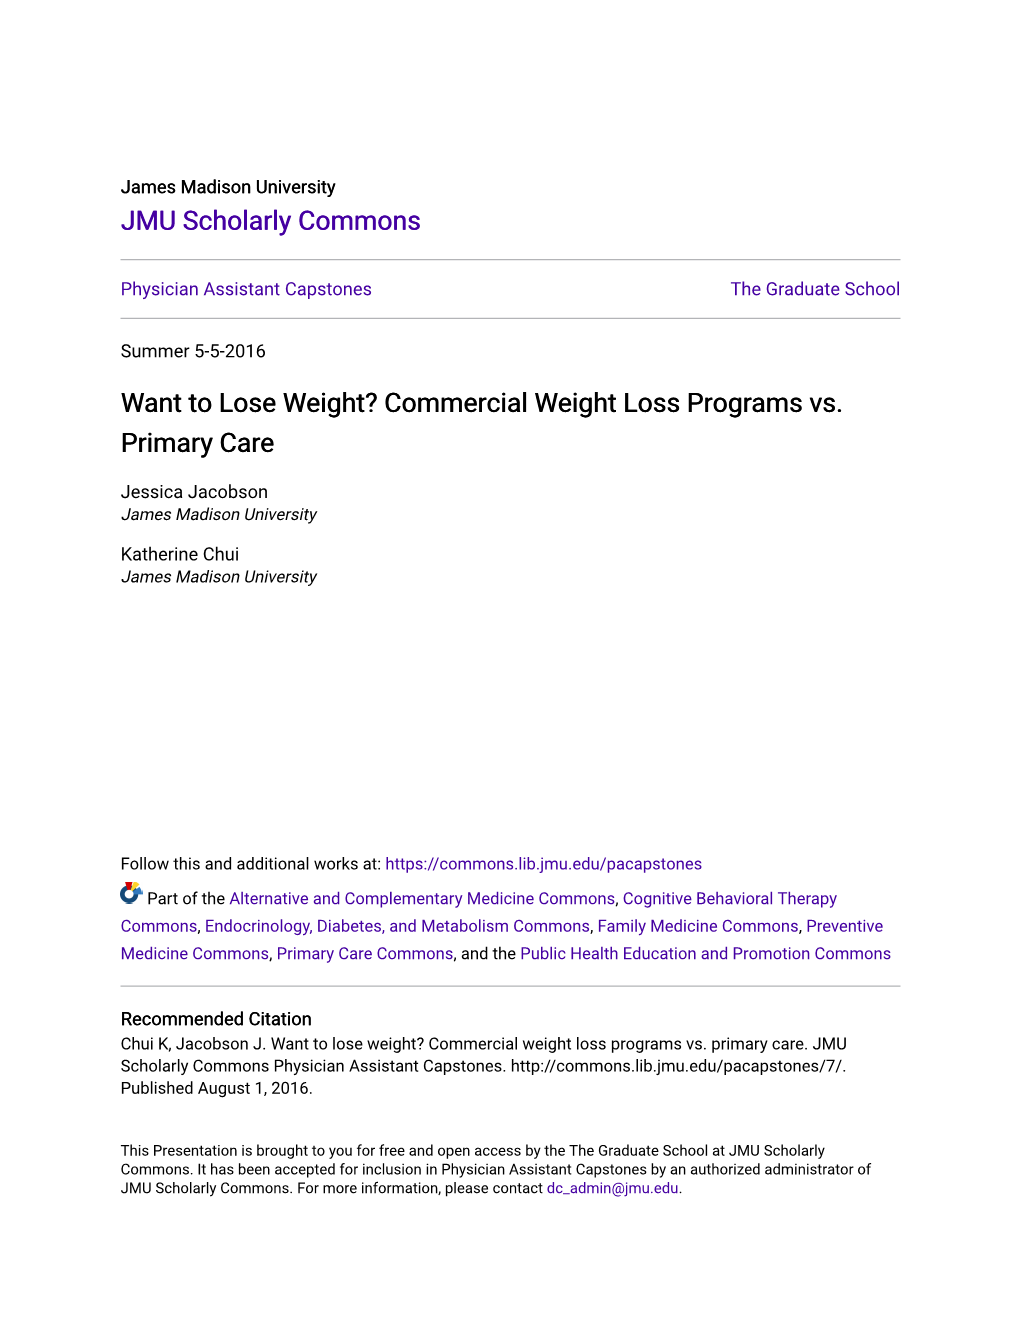 Want to Lose Weight? Commercial Weight Loss Programs Vs